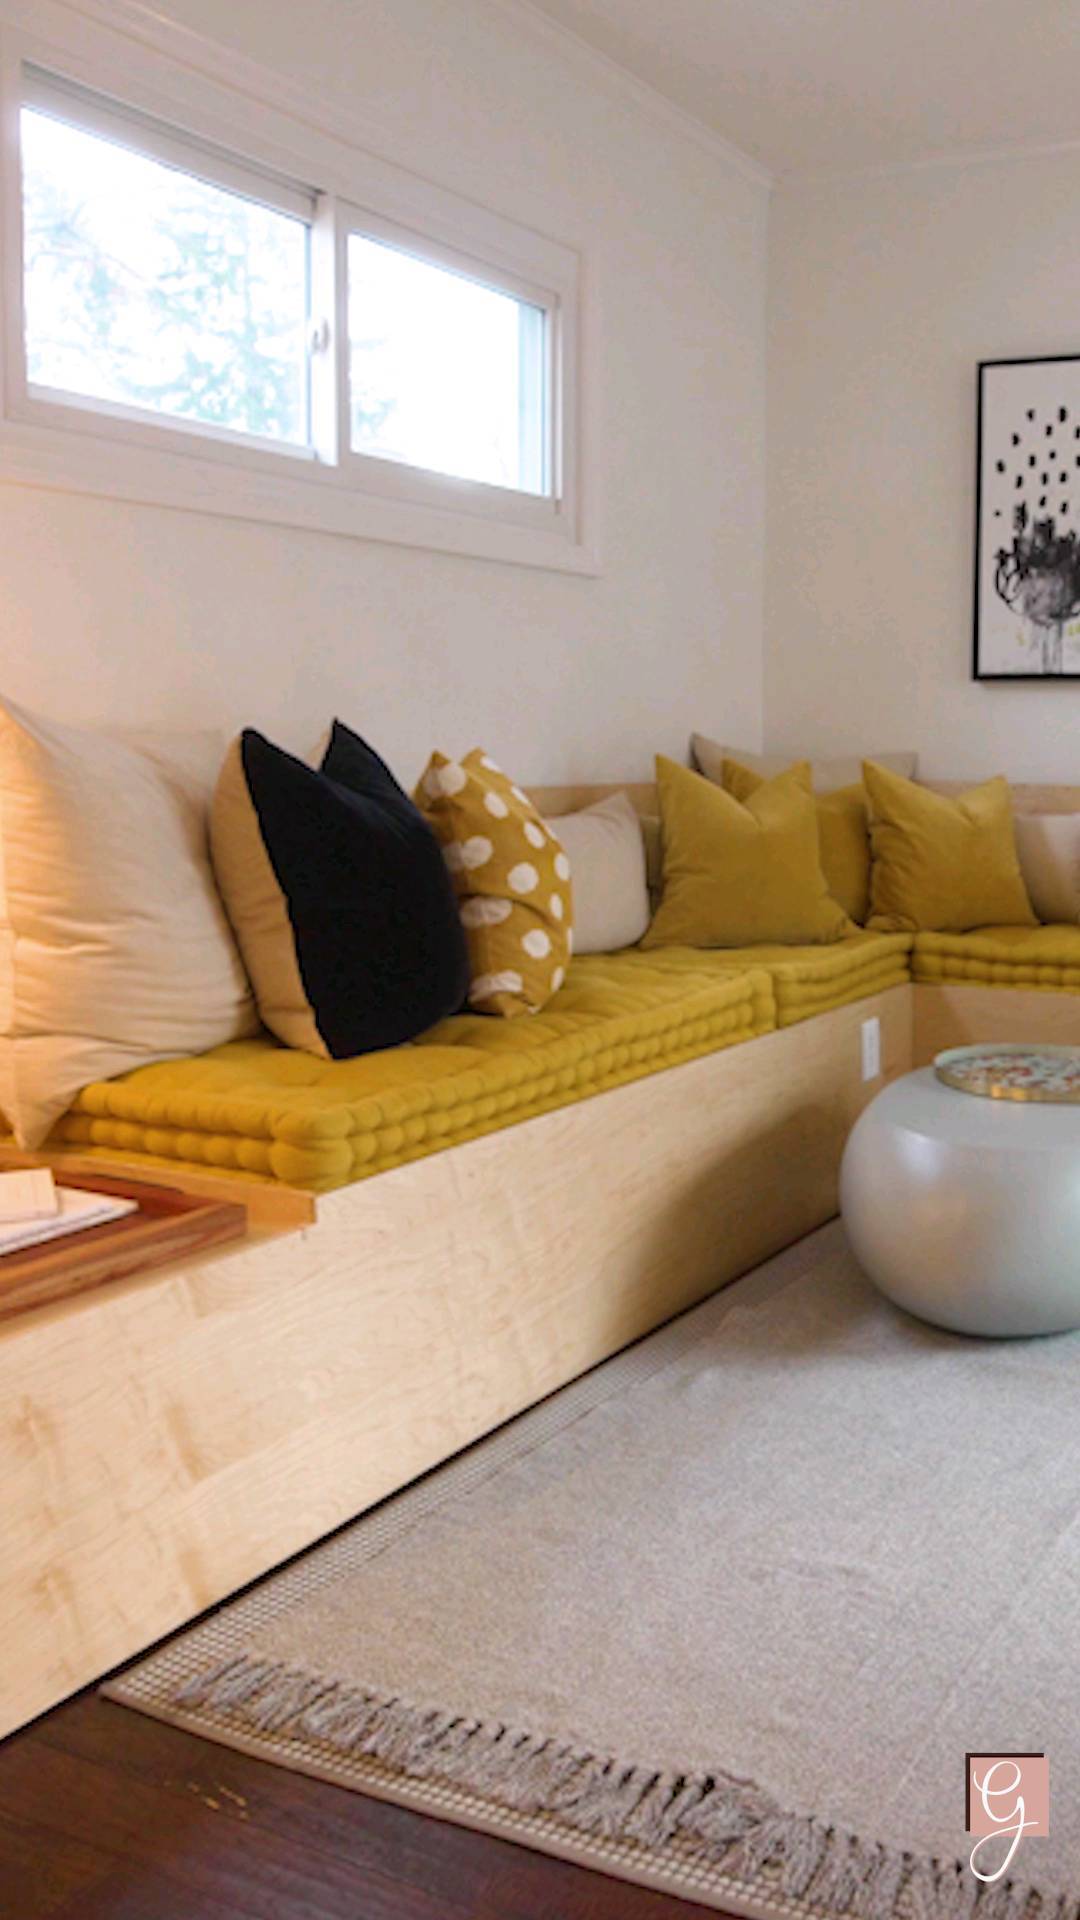 In this episode: I incorporate beautiful yellow ochre in our den. It brings so much life to our first floor. Look out for the full interior design series ~ Mondays.

#mycb2 #mycratestyle #mywestelm #den #livingrooms #livingroominspo #builtins #builtnotbought #sectionalsofa #sectional #cushions #throwpillows #art #abstractart #homedecorlovers #homedecorations #interiordesigninspiration #interiordesigninspo #mytakeonhome #myhome #myhomevibe #myhomedecor #homestyle